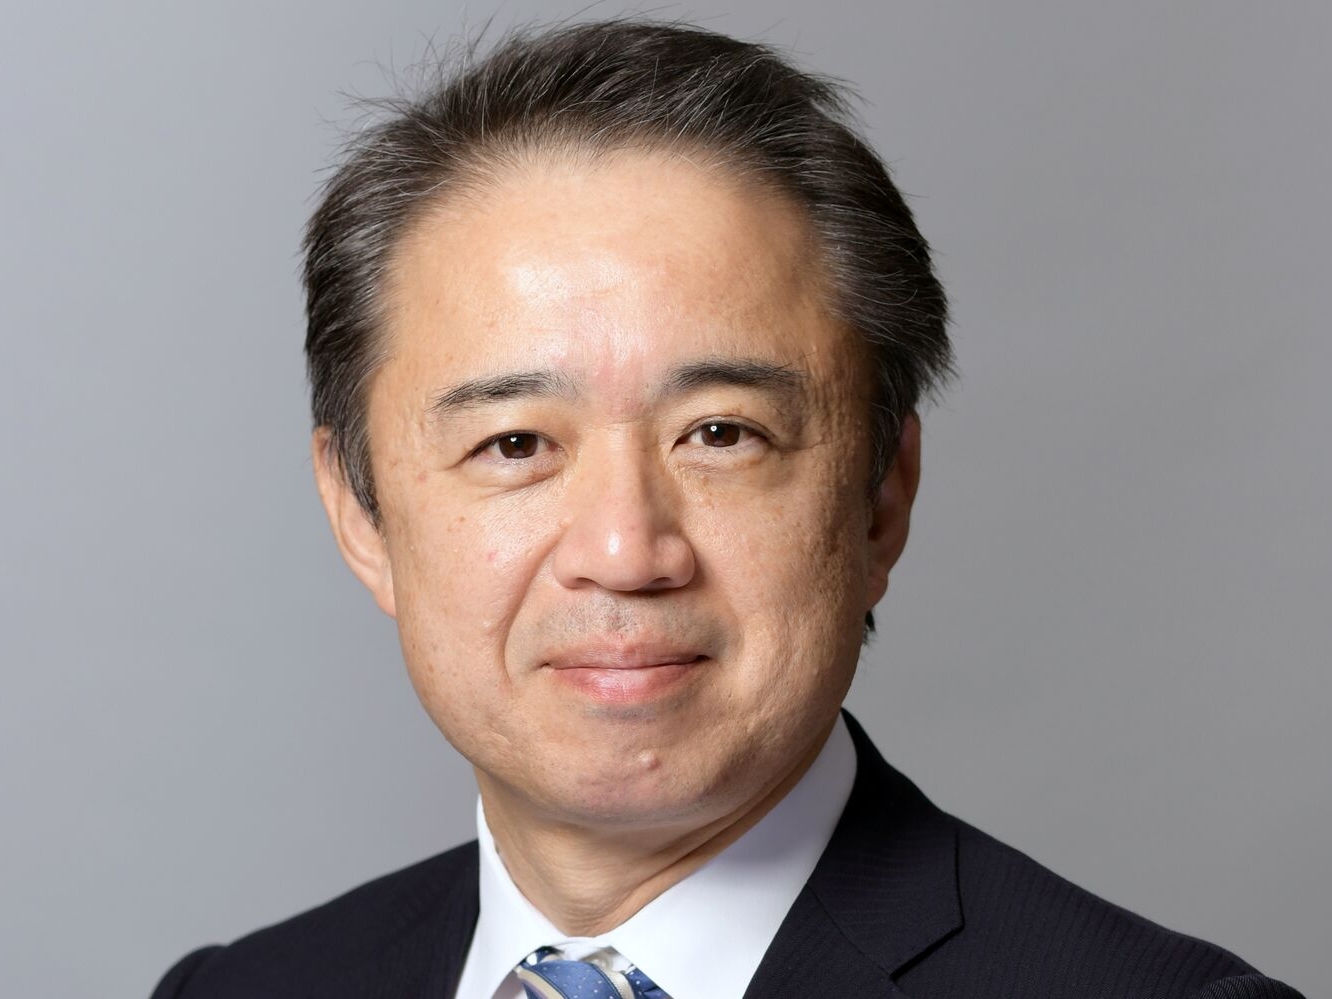 Tohru Sasaki, chief strategist at Fukuoka Financial Group and panelist, warned of complications if Japanese households lose faith in the yen and shift their 1,100 trillion yen in savings abroad. 

Image Source: Bloomberg 